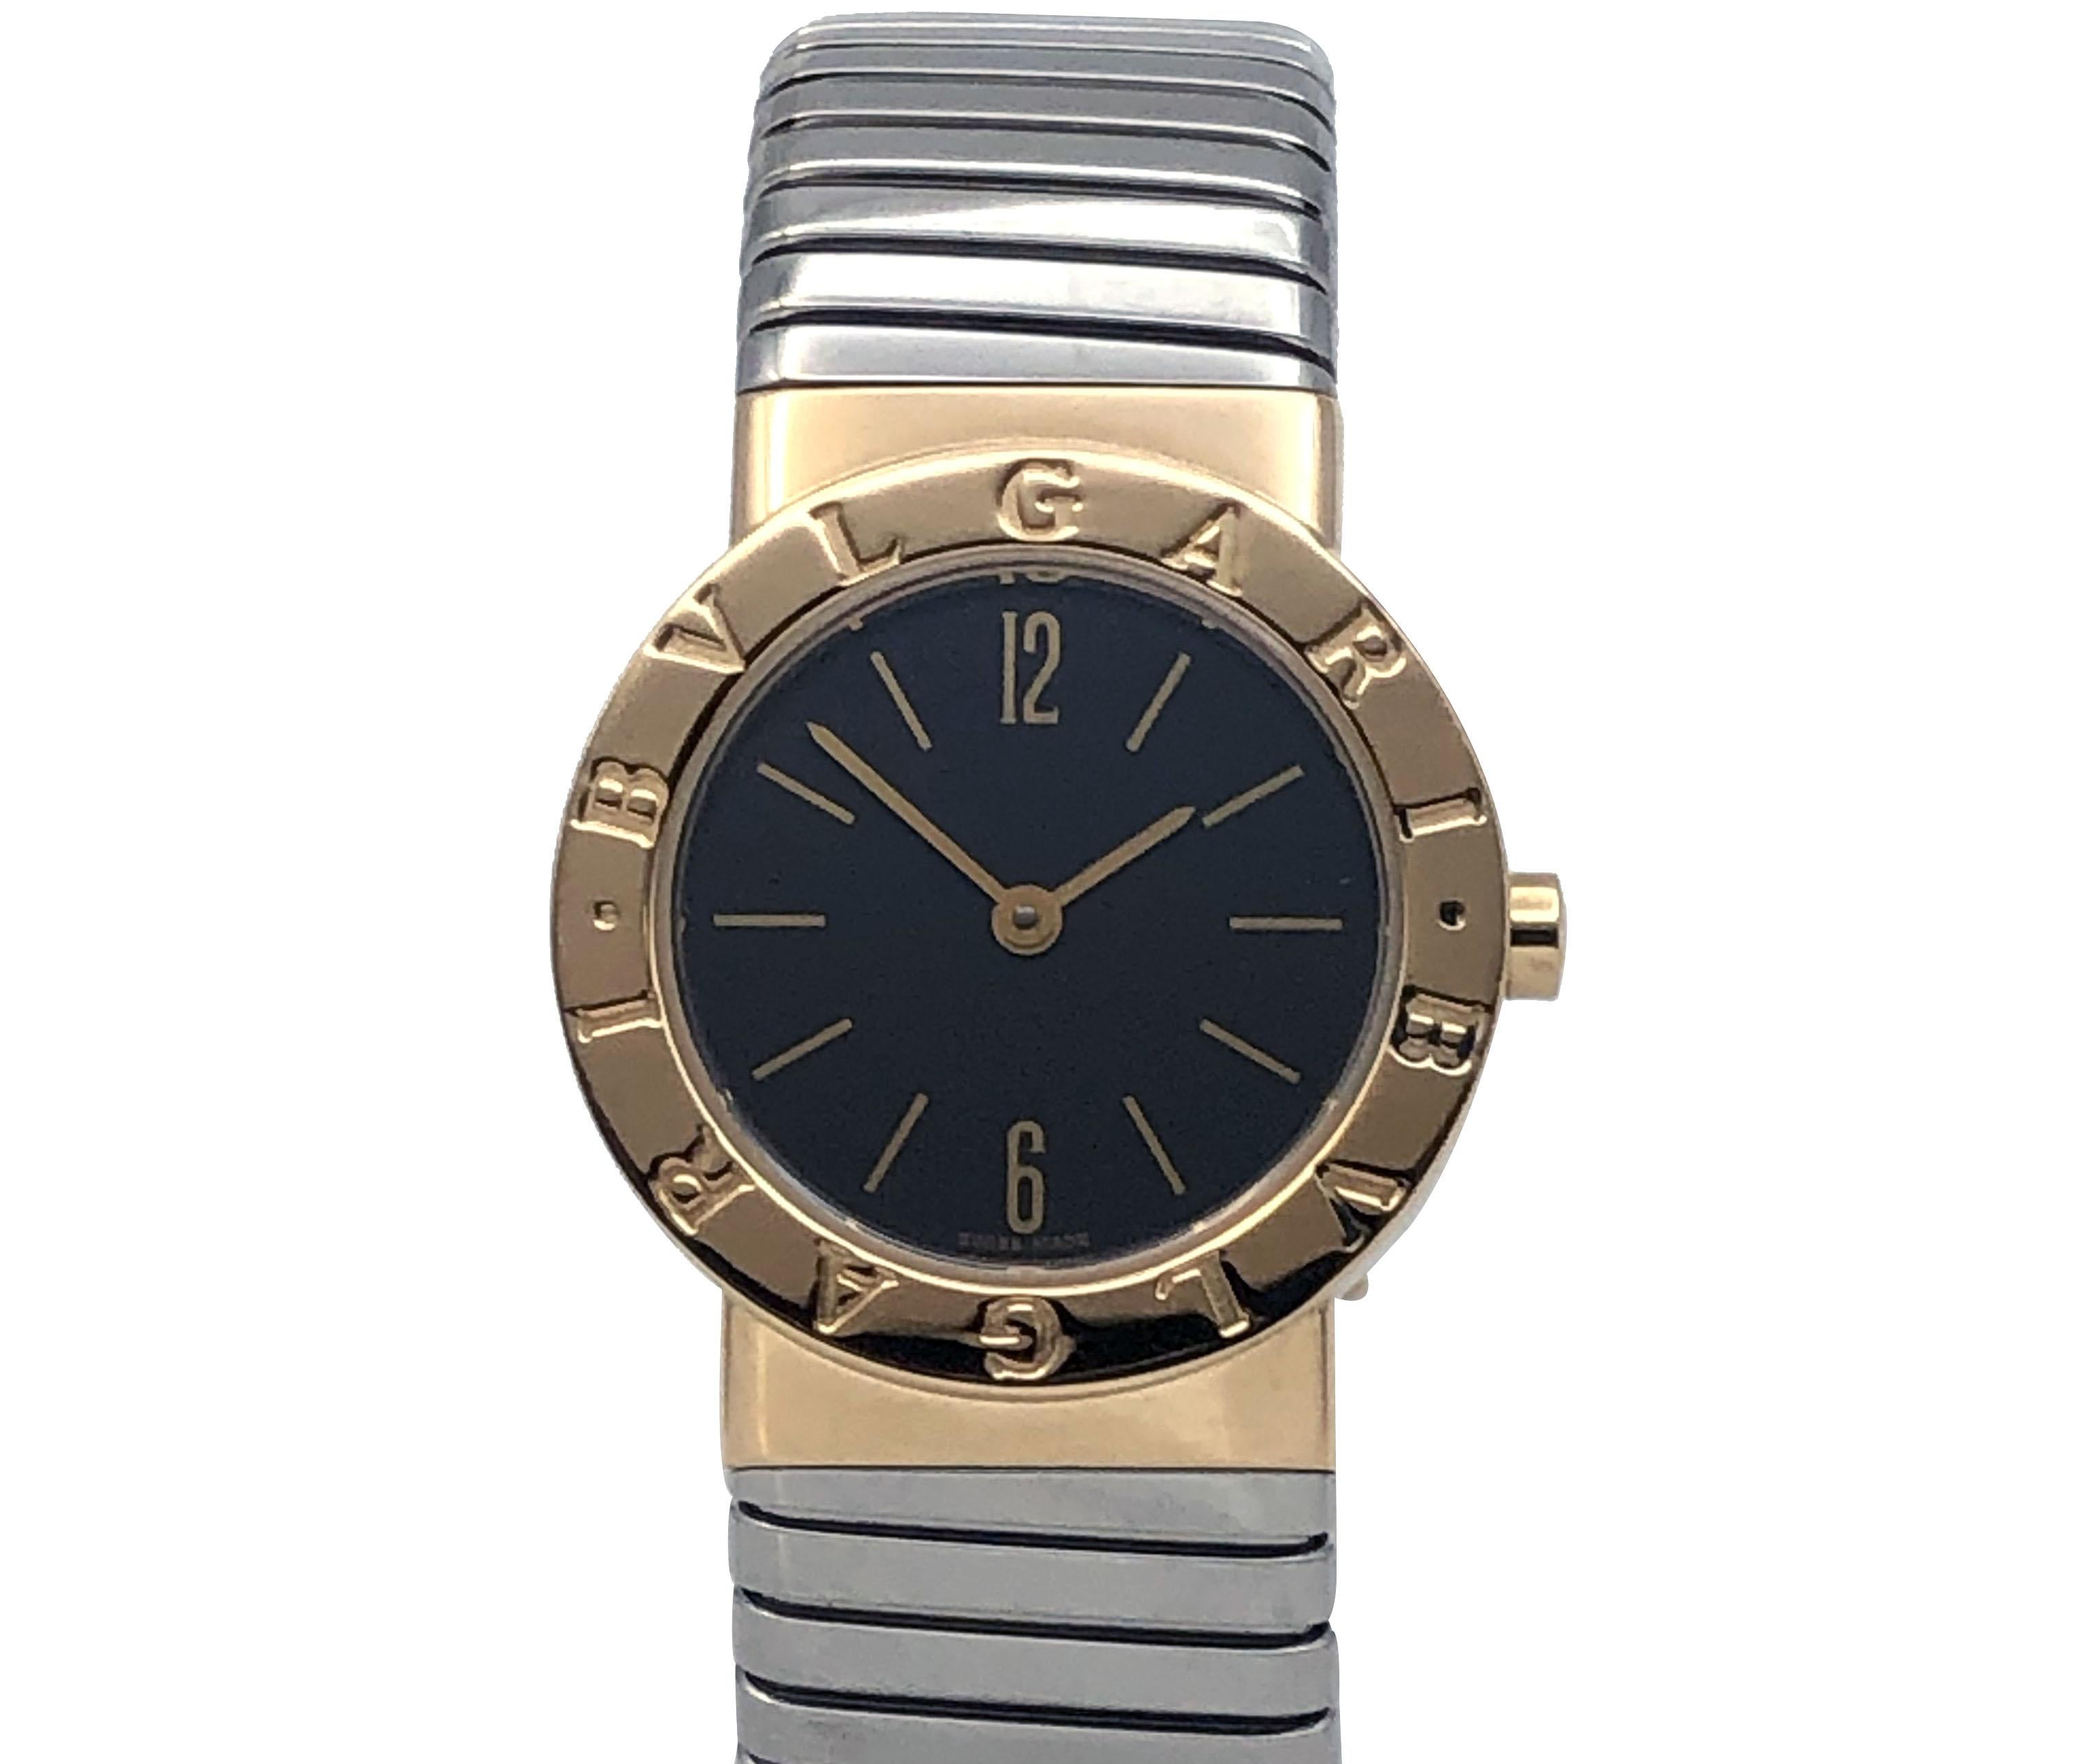 Circa 2000 Bulgari Tubogas Ladies Wrist Watch, 26 M.M. 18k Yellow Gold 2 Piece case, Quartz movement, Black Dial, Stainless steel with 18k Gold end pieces 5/8 inch wide flexible bracelet. Wrist size 5 1/2 to 6 1/2 inches. Comes in the original